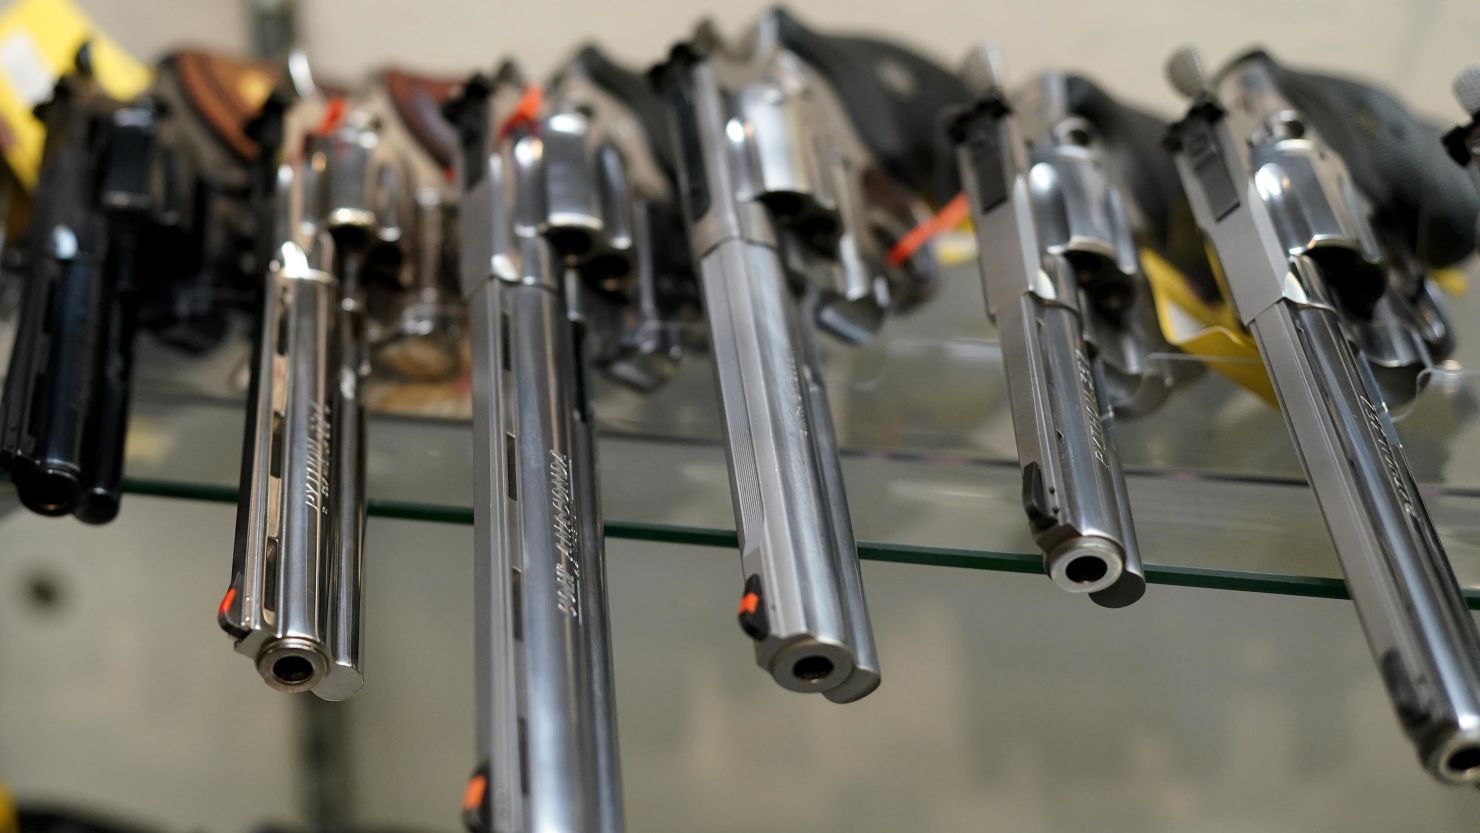 Support for gun control just hit its lowest point in almost a